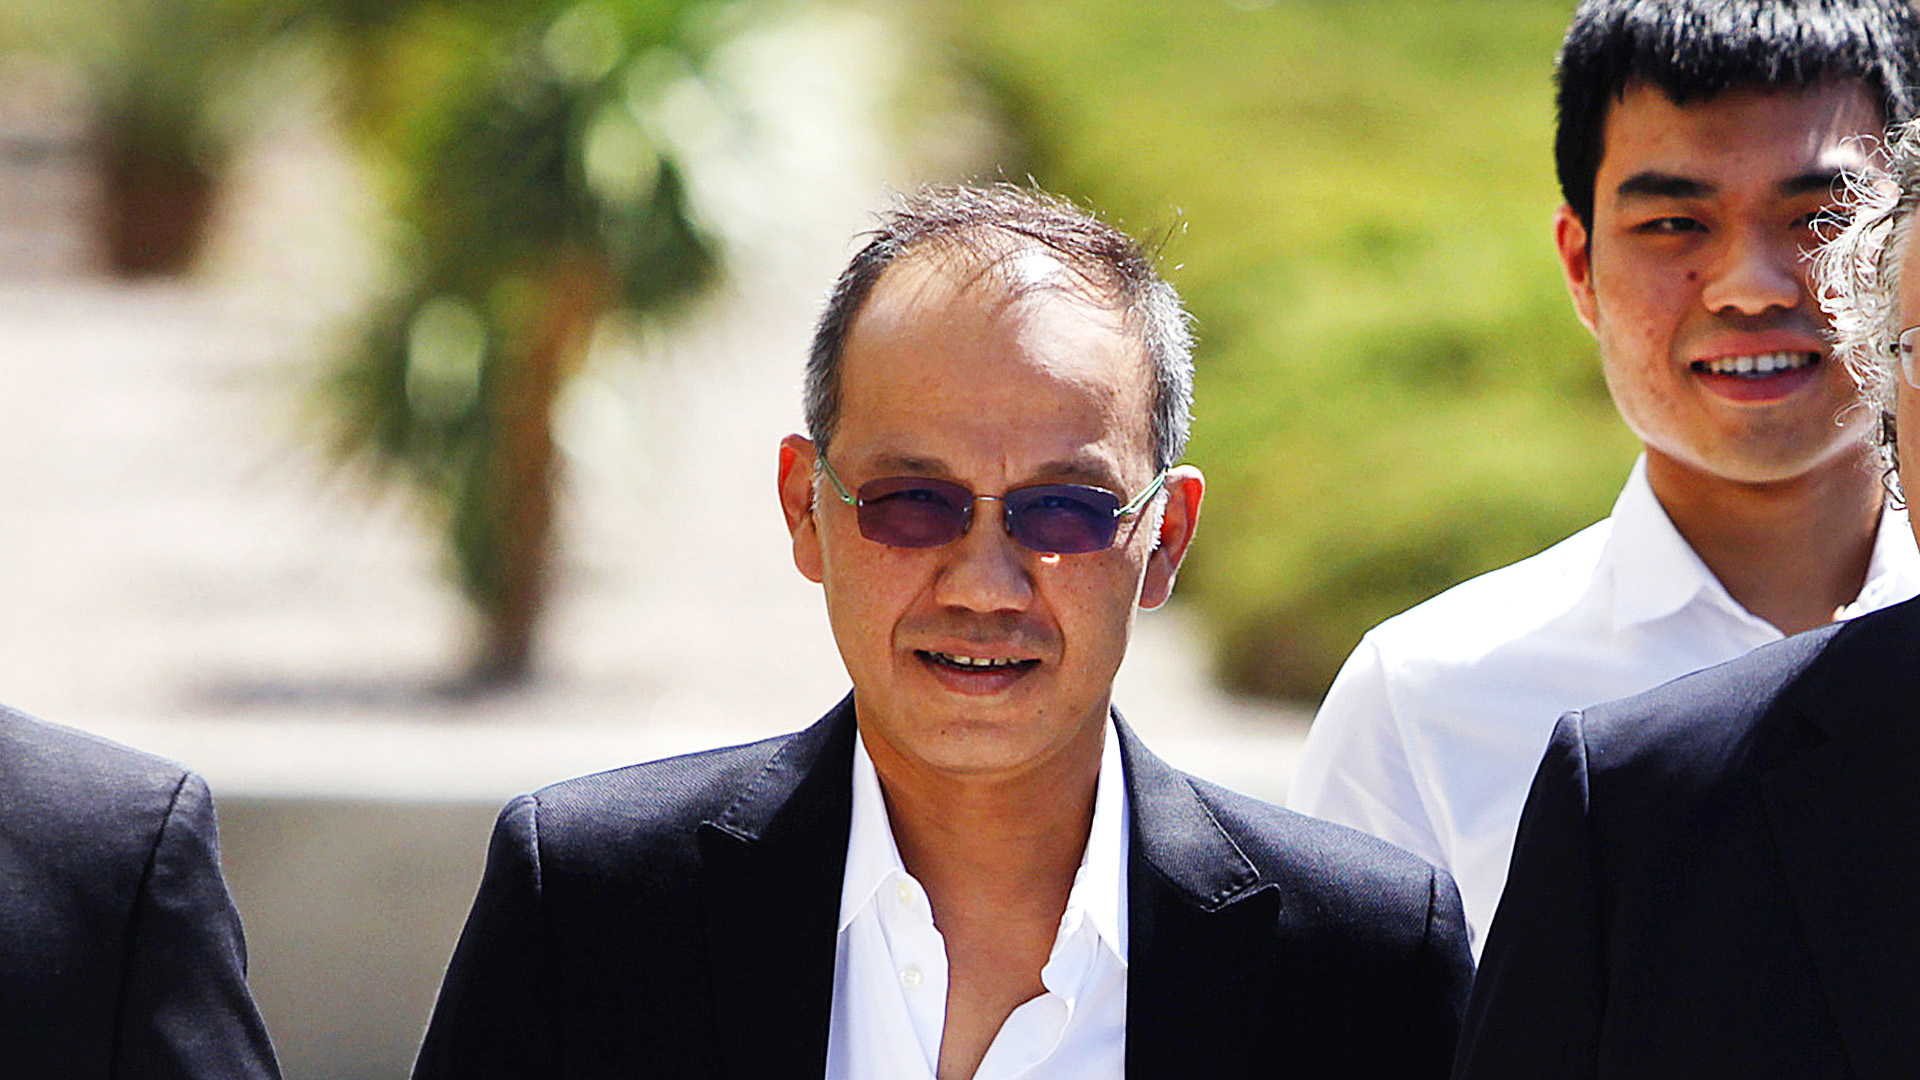 Paul Phua and his son Darren (right) walk to a courthouse in Las Vegas with their attorney Richard Schonfeld in August 2014. Photo: AP